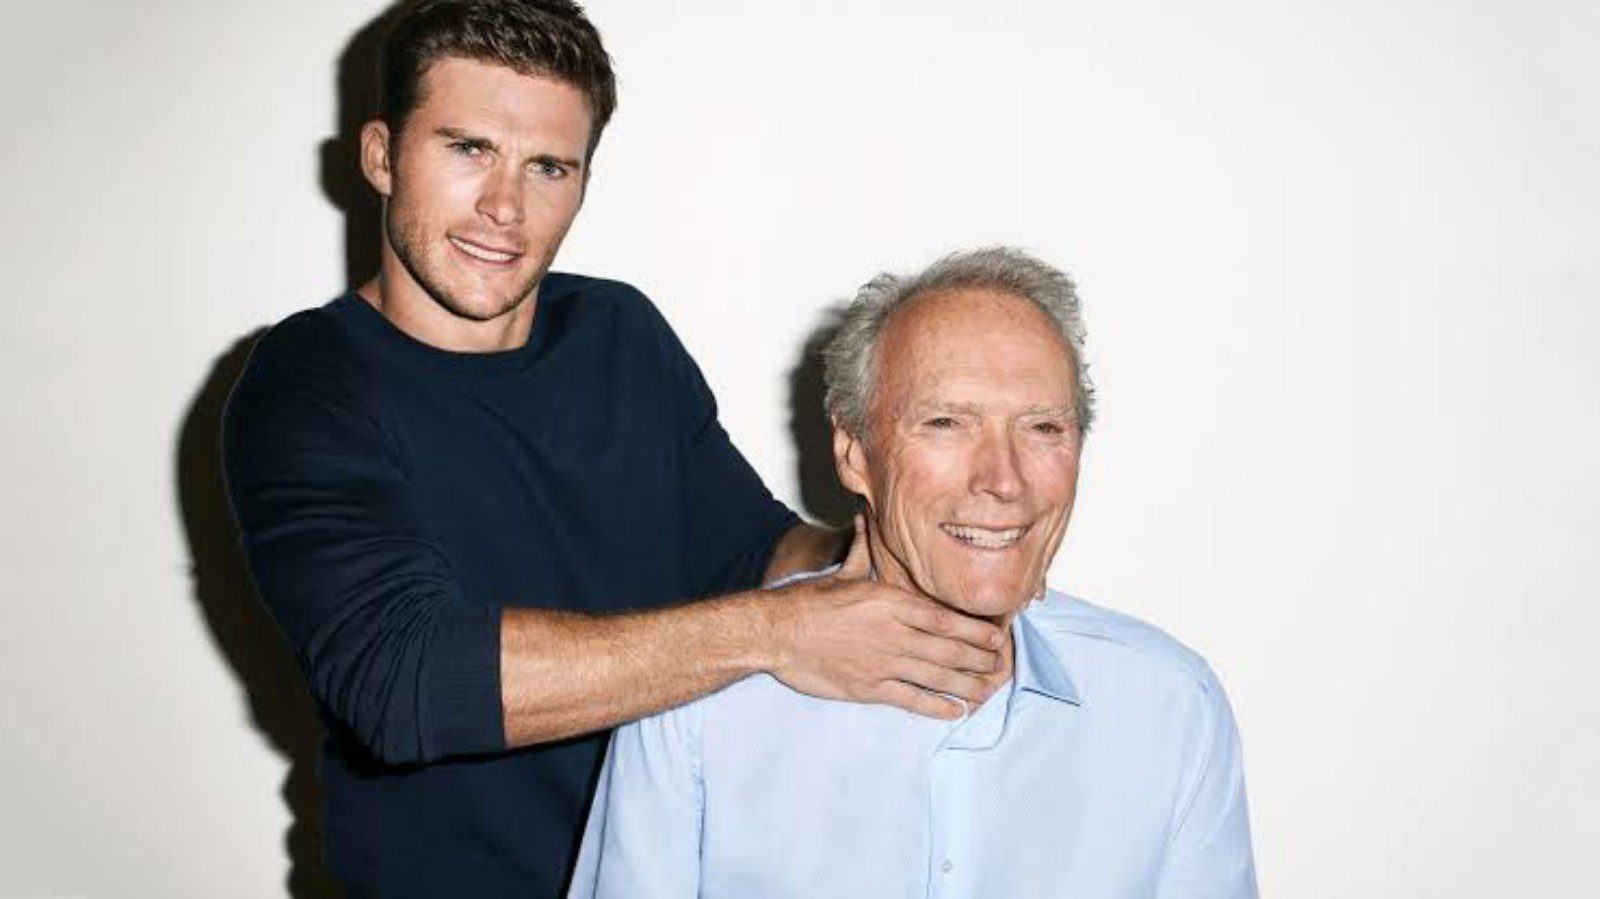 Who is Scott Eastwood's Girlfriend? All His Relationships So Far